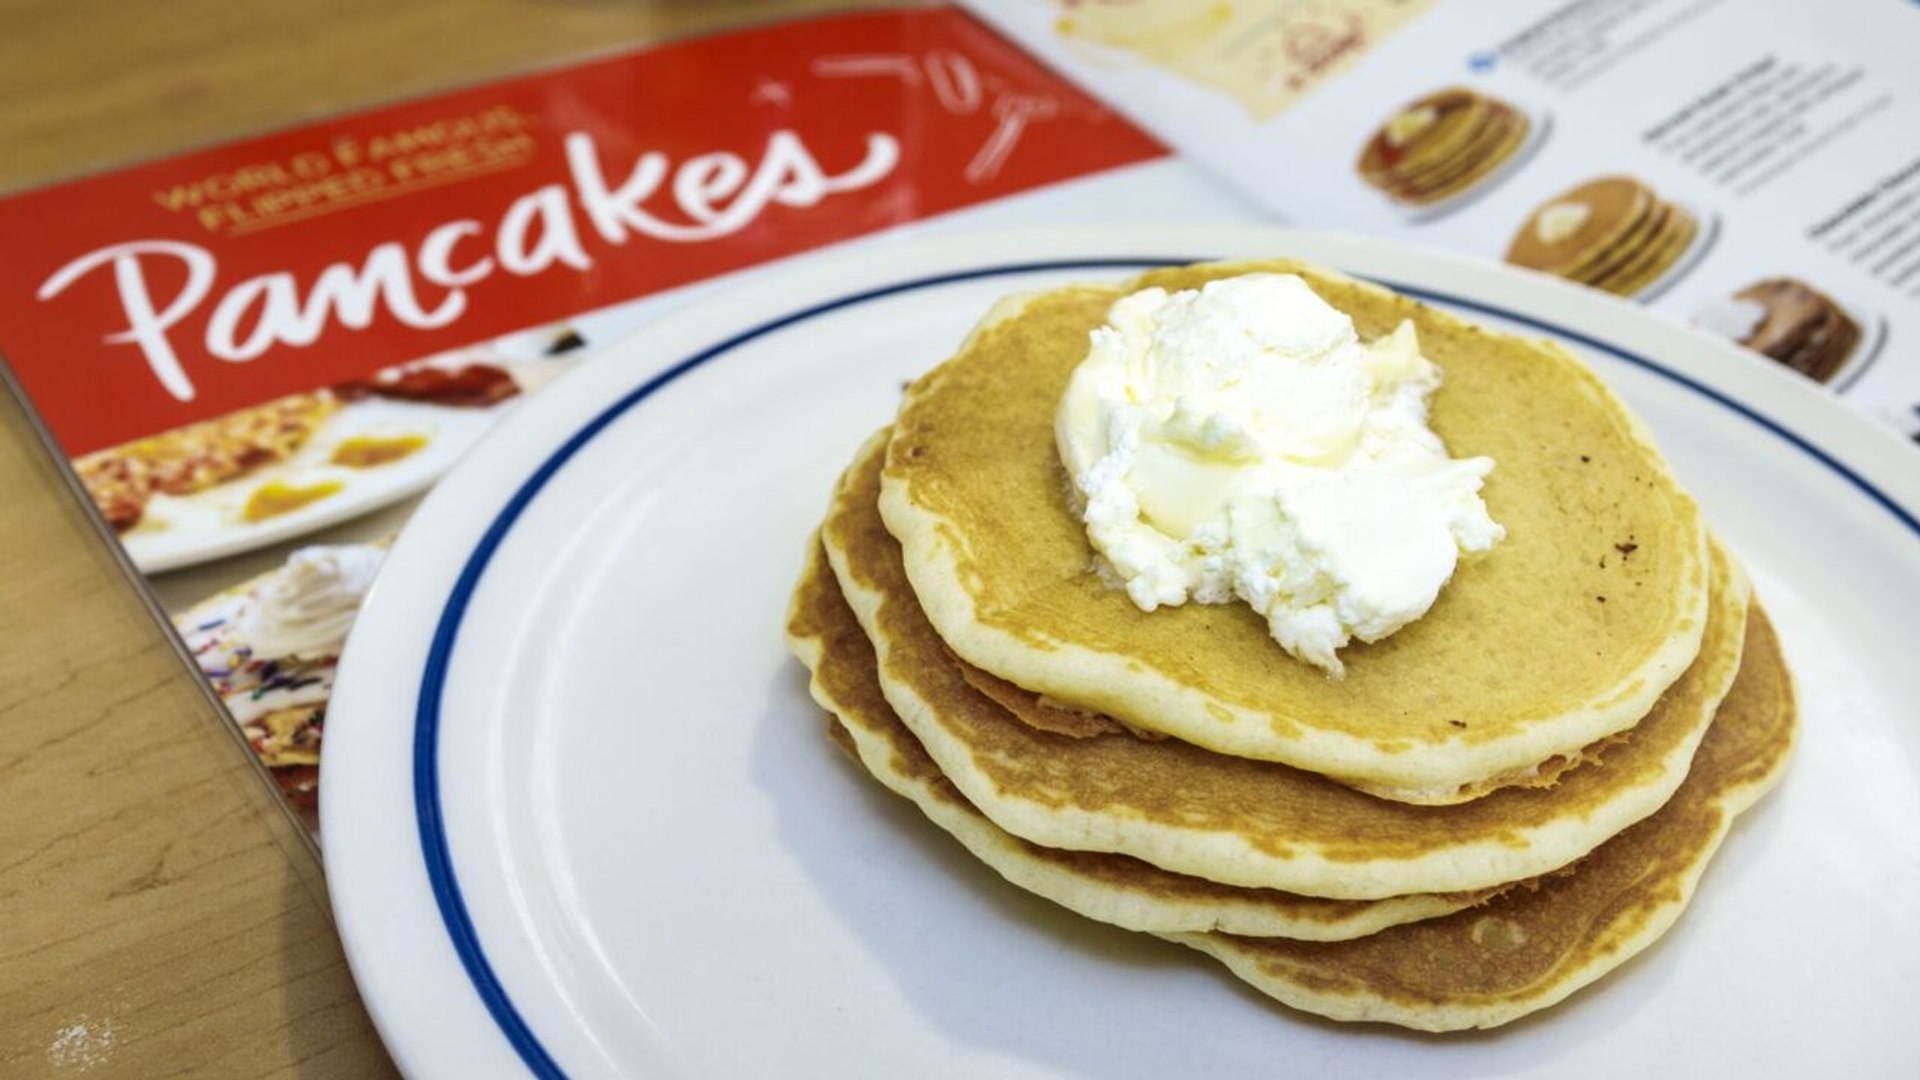 IHOP Introduces Cereal Pancakes: Limited-Time Menu Also Includes